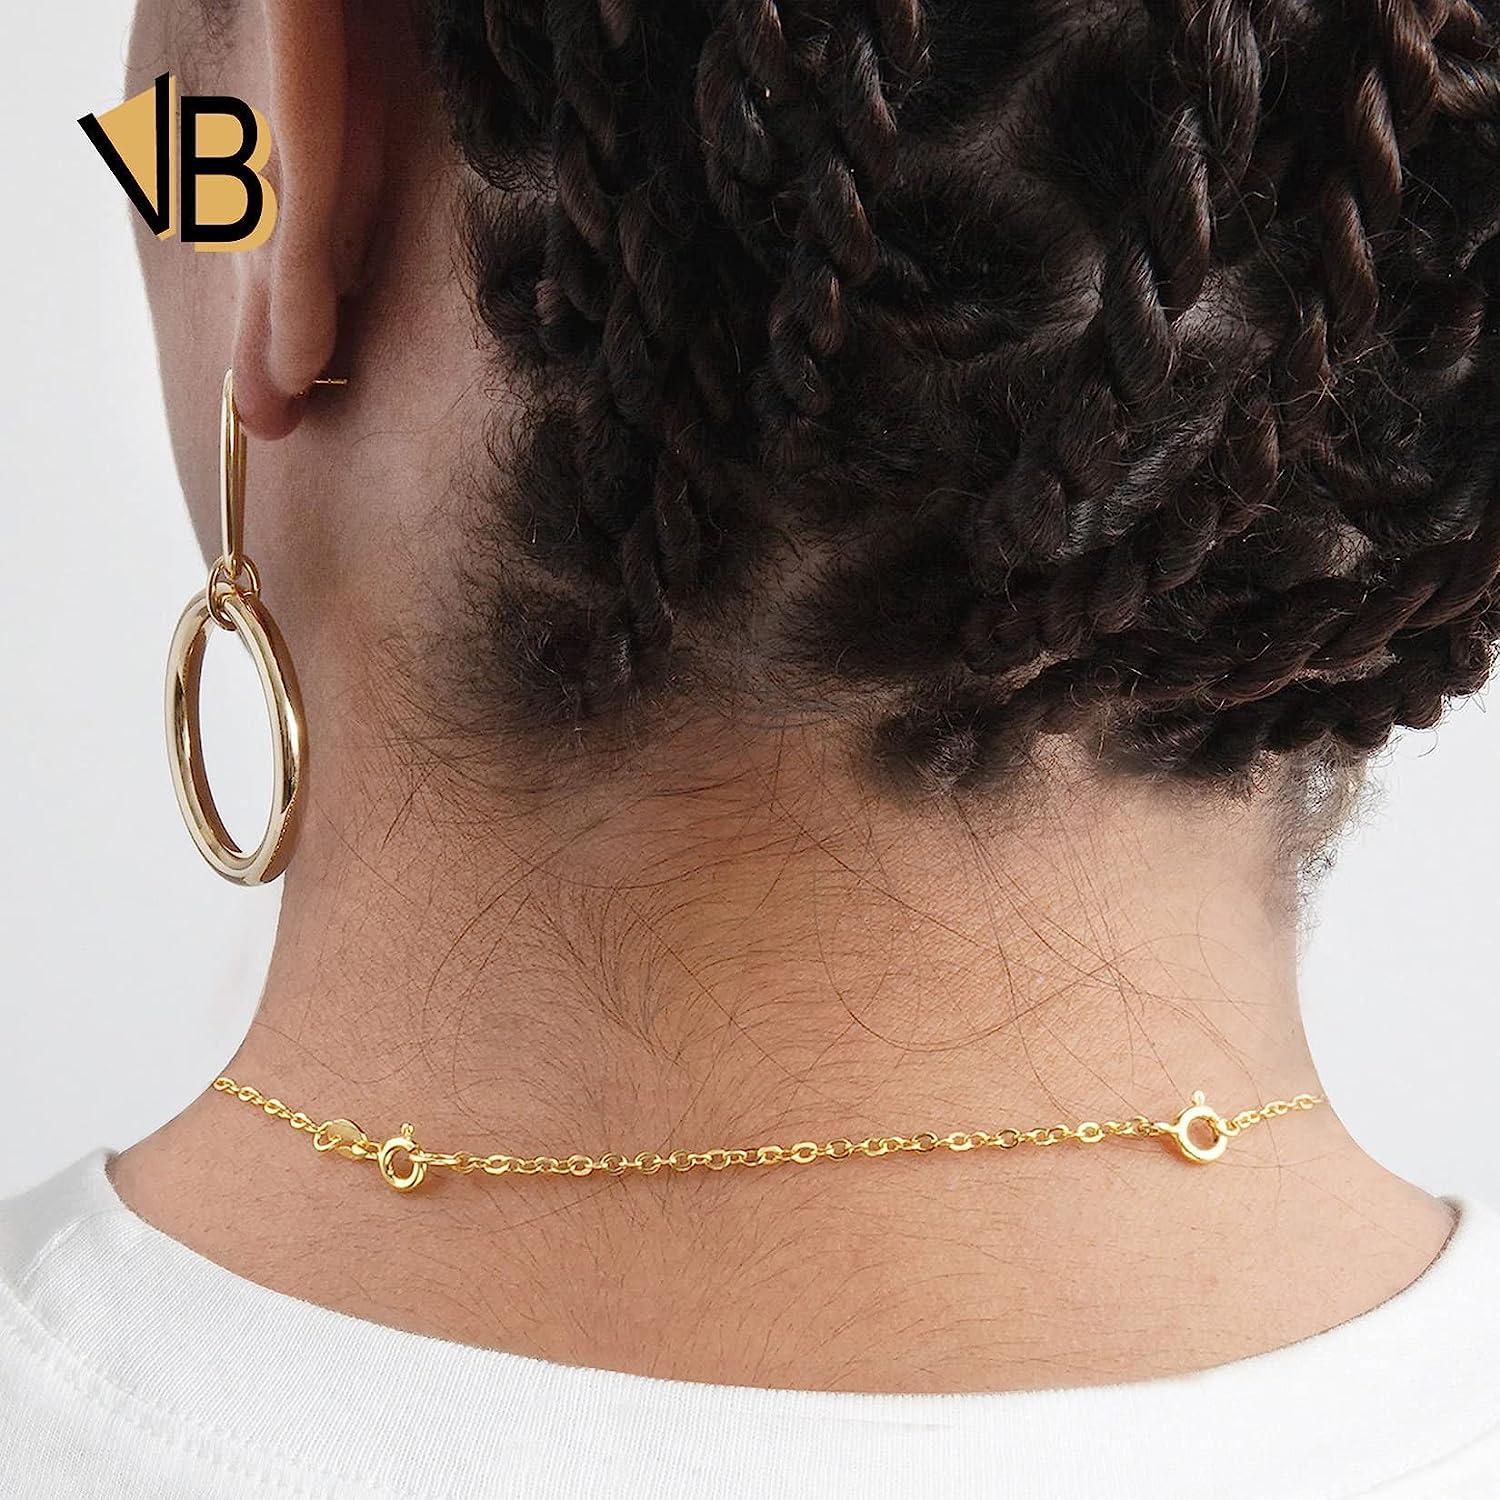 Gold Necklace Extenders 14k Gold Plated Extender Chain 925 Sterling Silver  Extension Bracelet Extender Gold Chain Extenders for Necklaces 3 Pcs -  Venue Marketplace